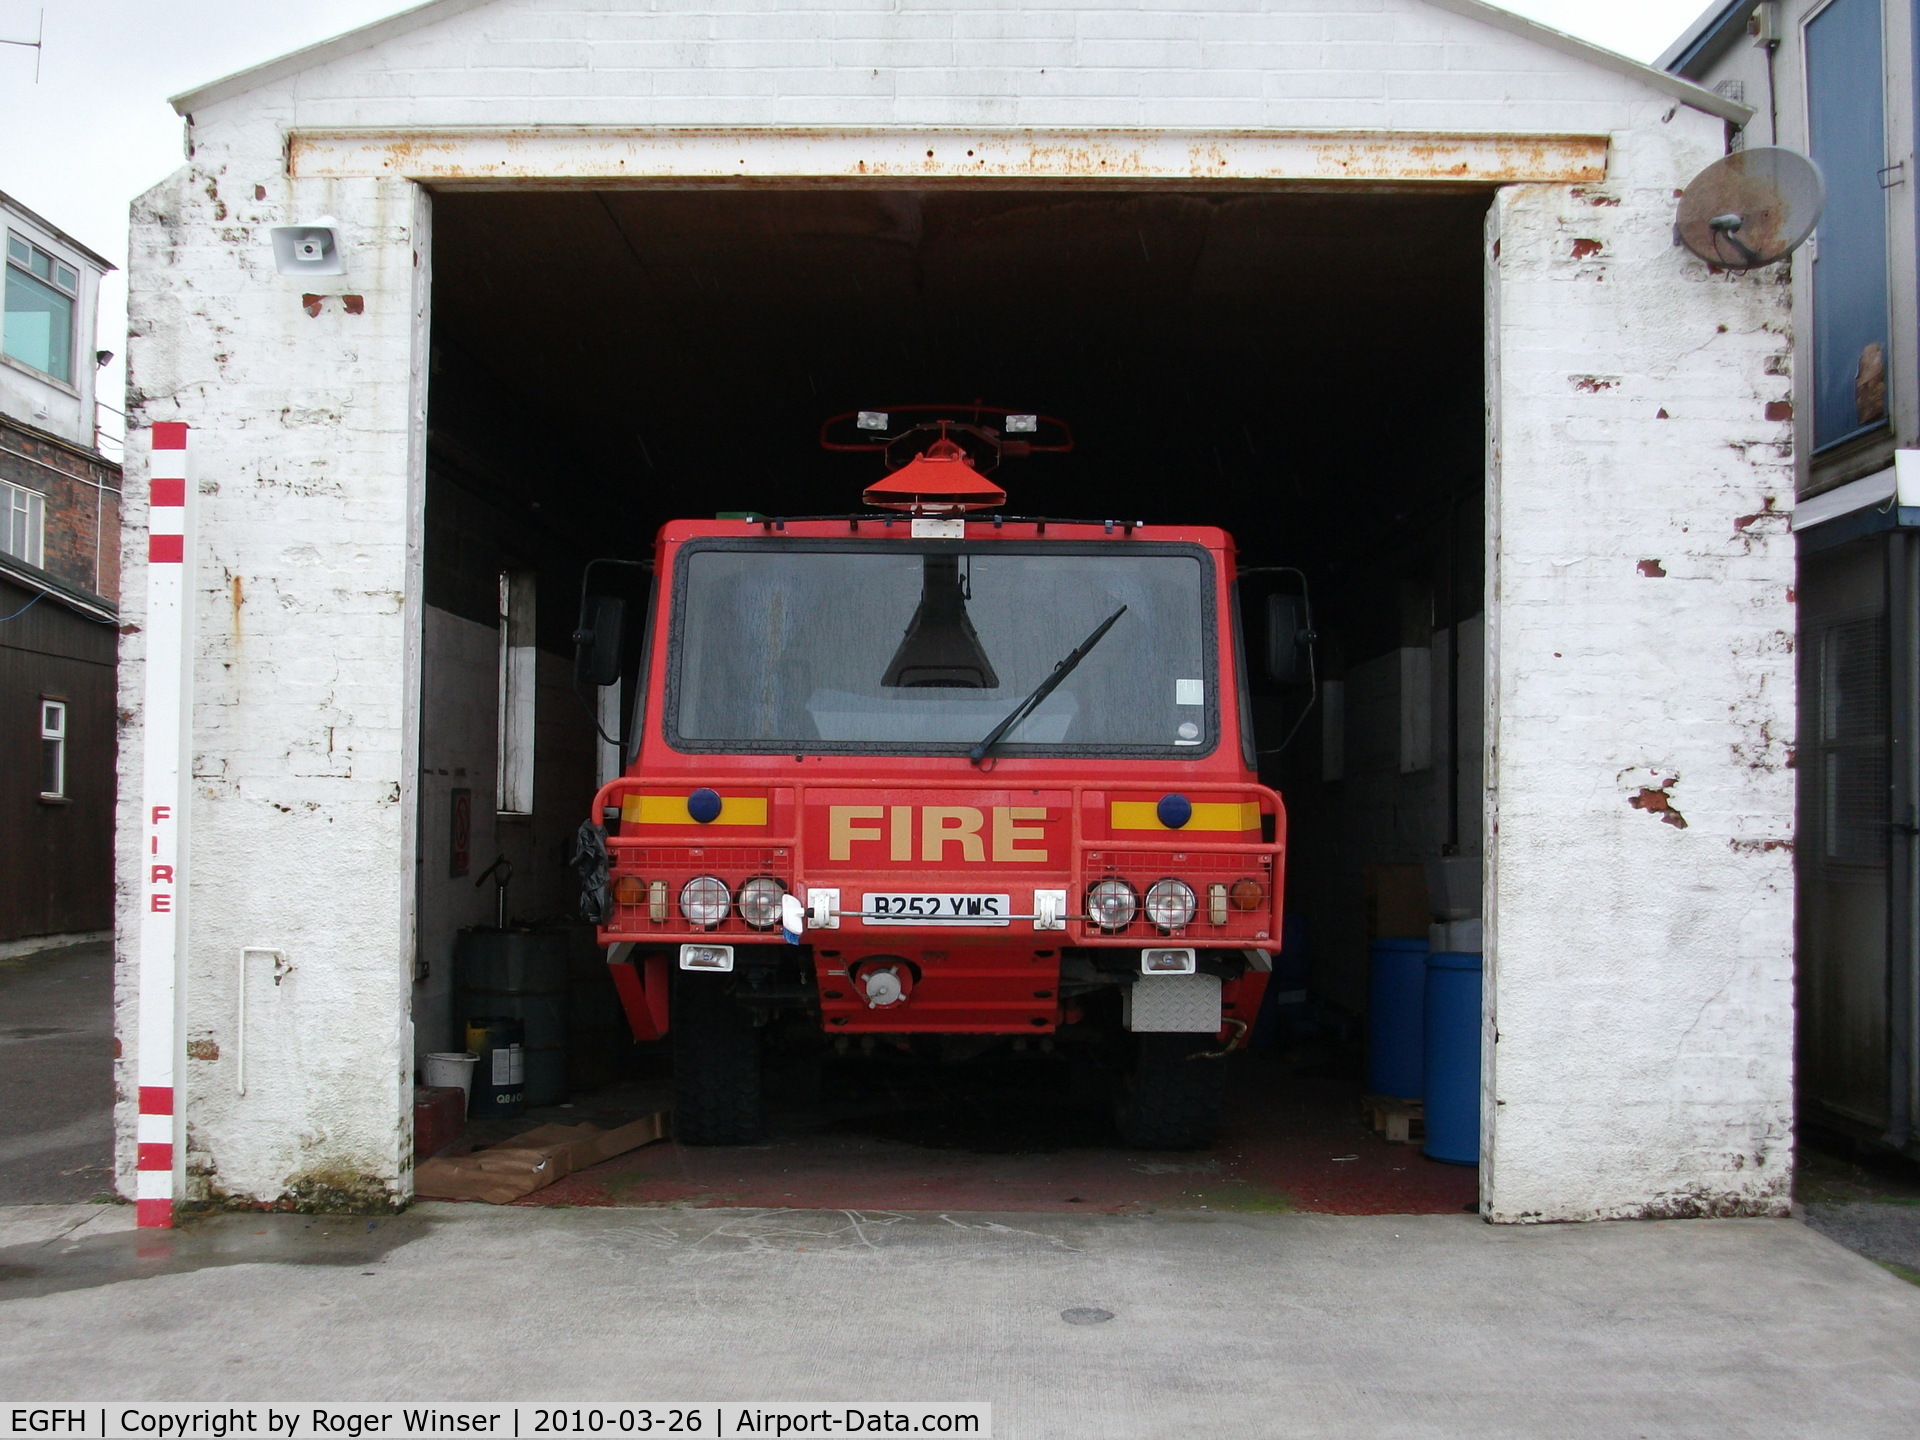 Swansea Airport, Swansea, Wales United Kingdom (EGFH) - Airport Fire and Rescue Services six-wheeled Scamell FIRE 1